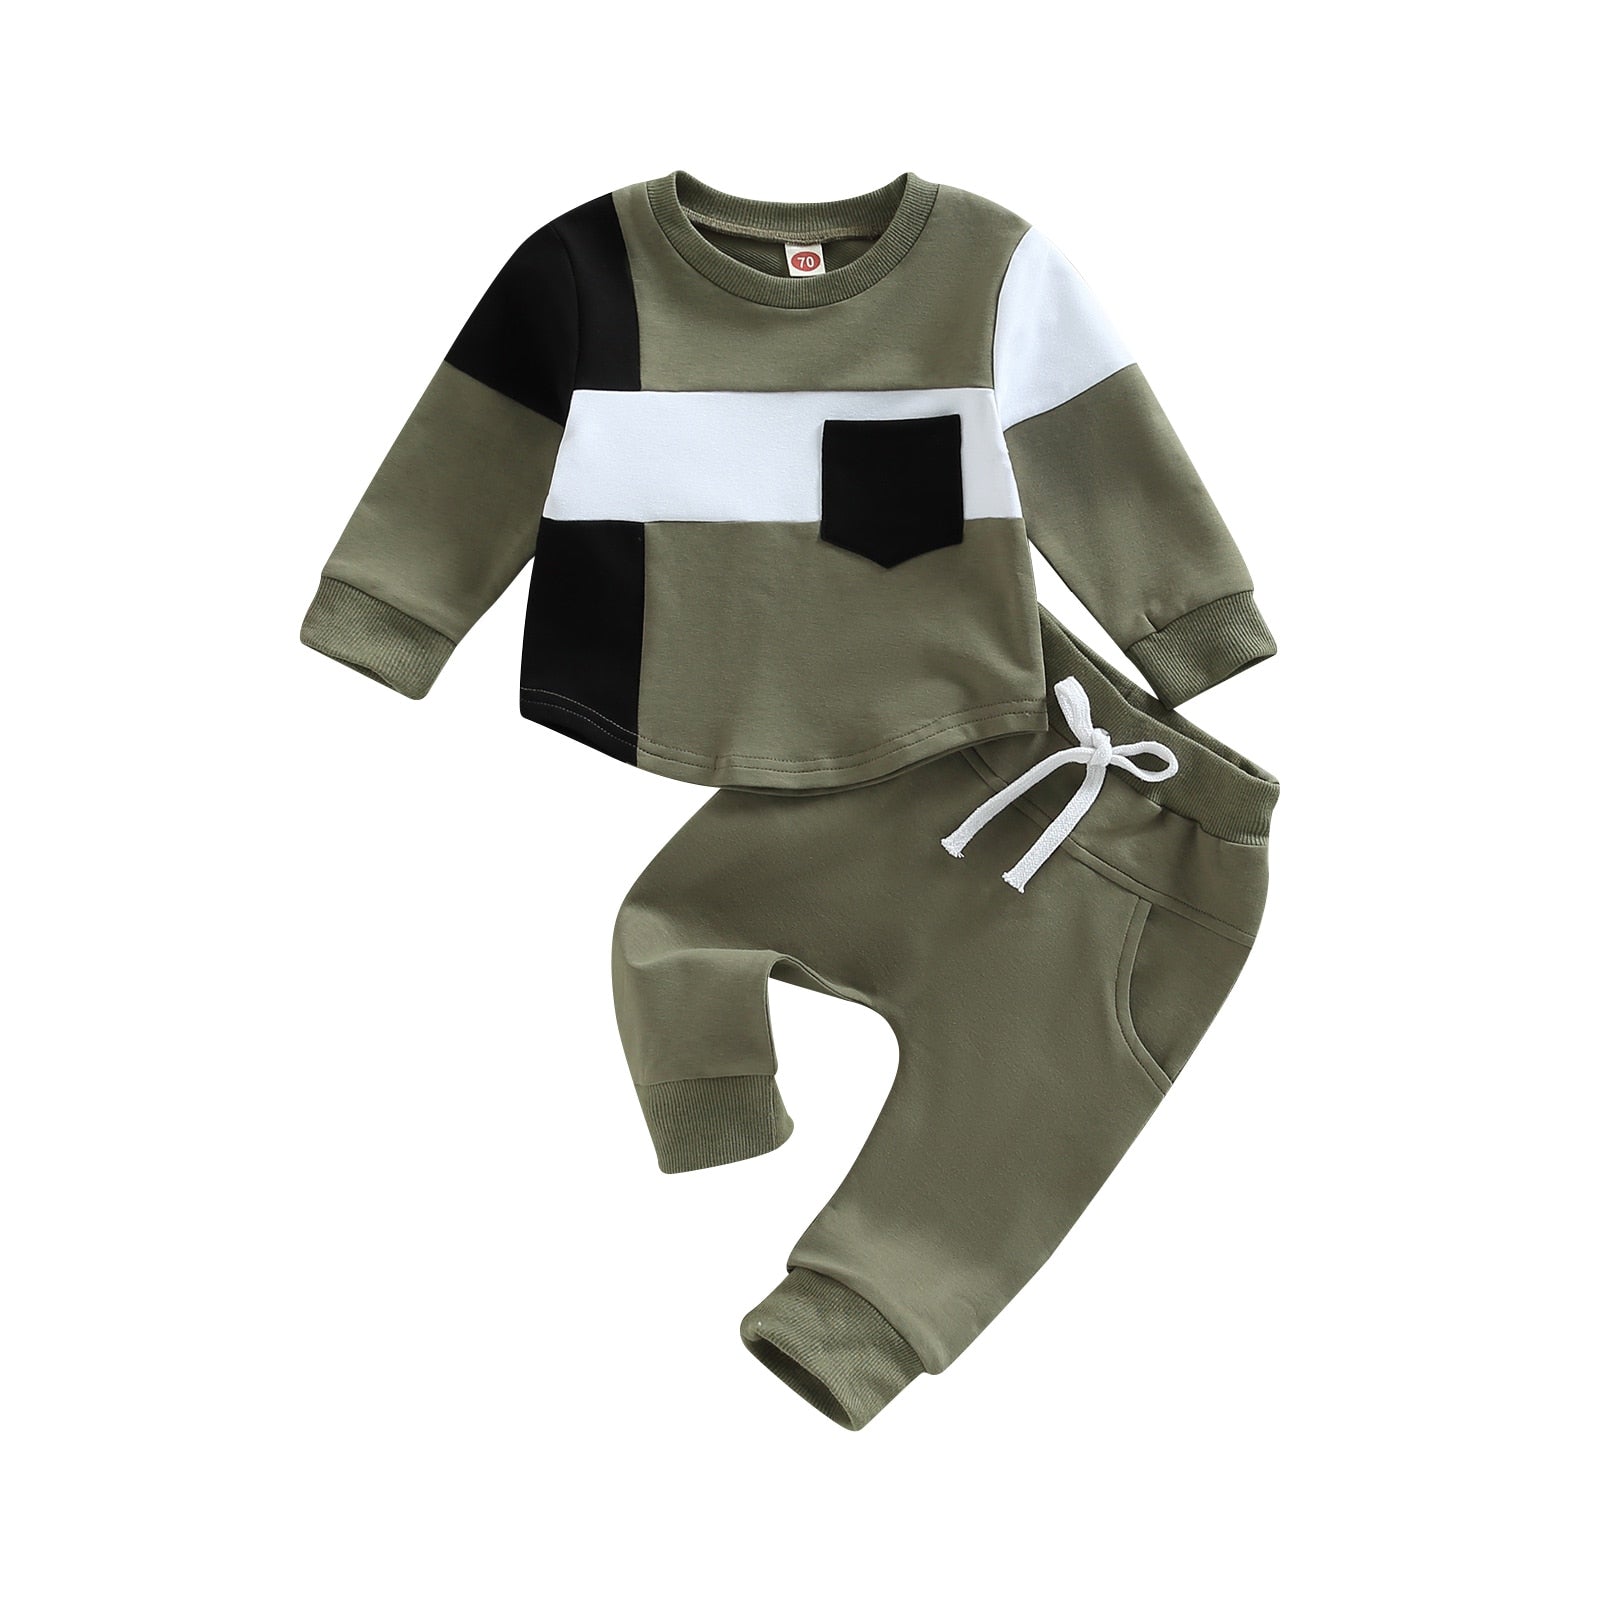 boys outfits for toddlers Long Sleeve Patchwork Pullover Tops and Pocket Pants Infant Clothing Winter Baby Clothes - BabbeZz